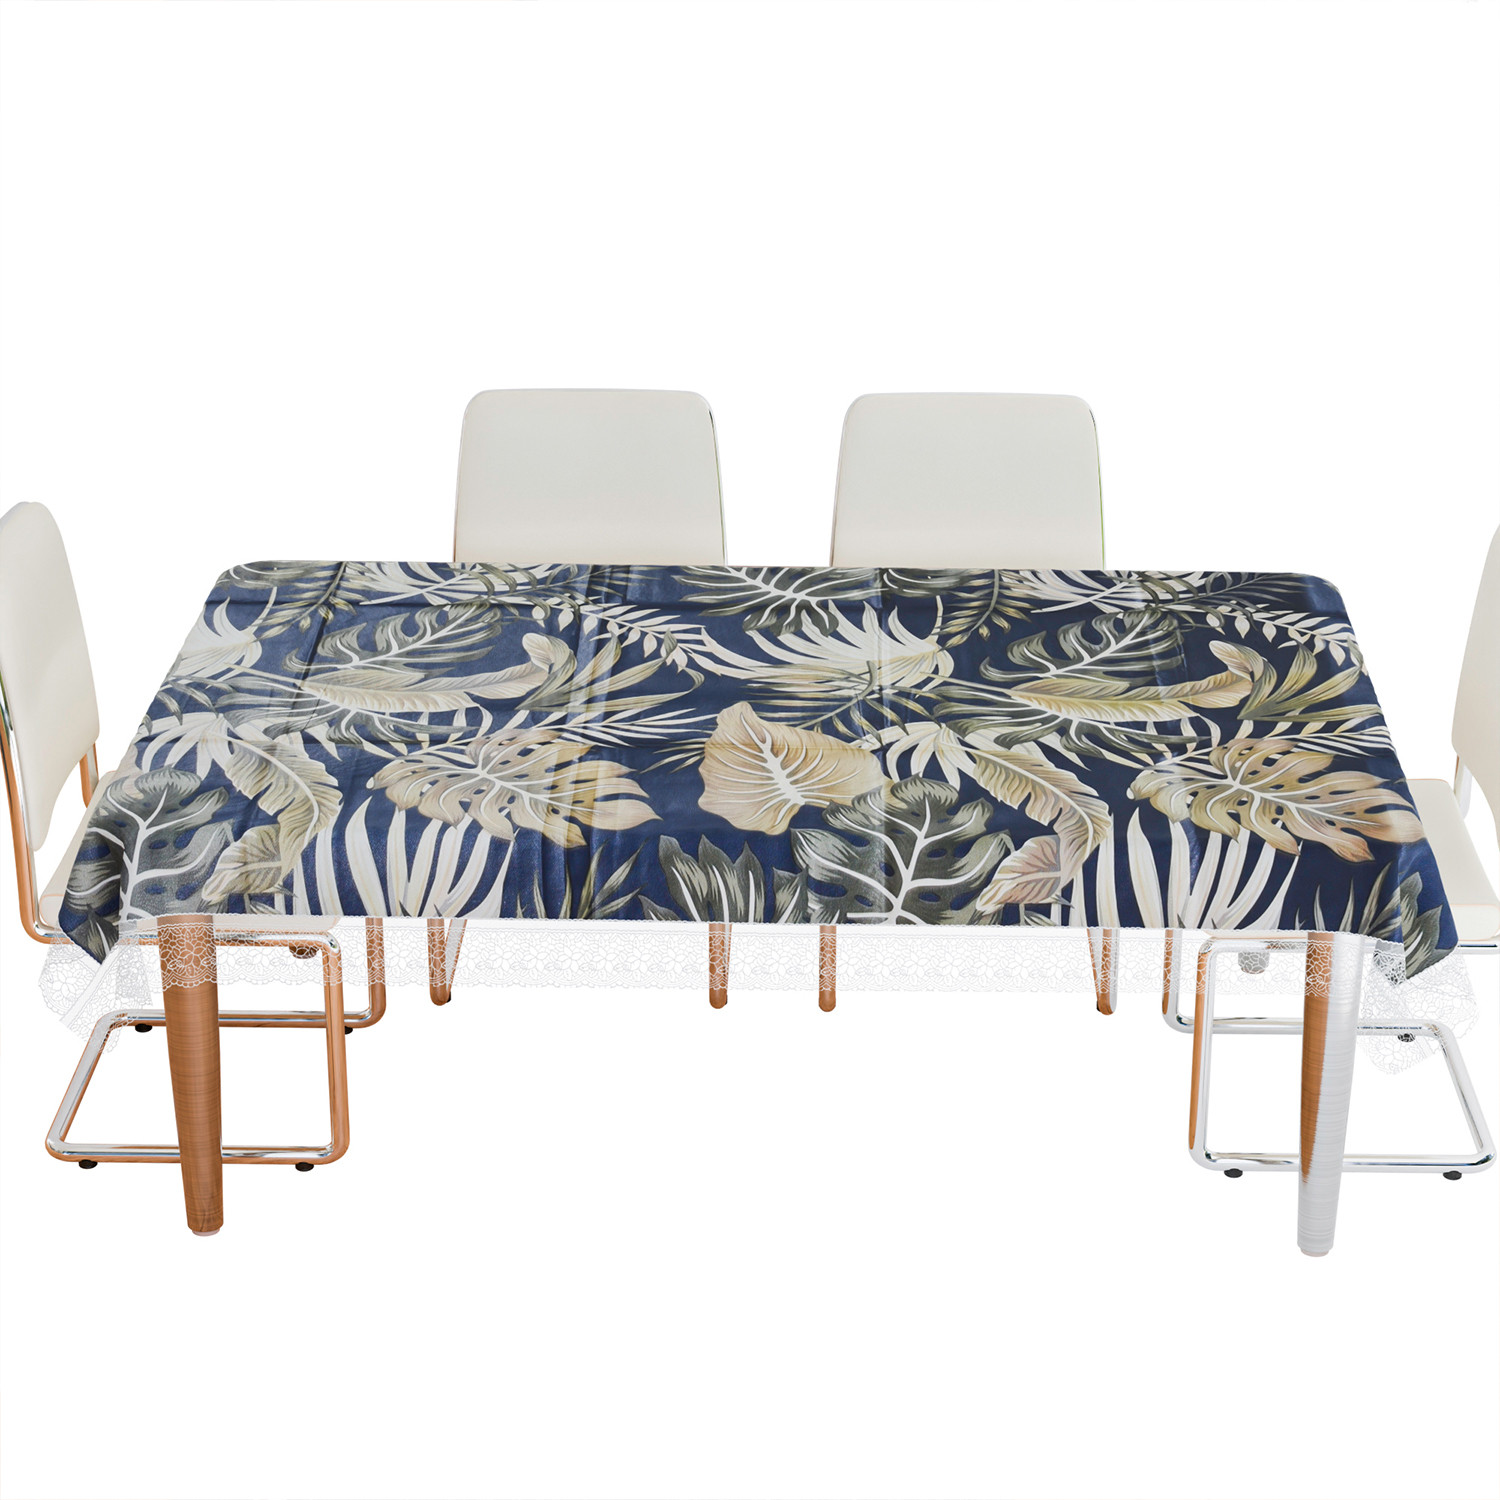 Kuber Industries Dining Table Cover | PVC Table Cloth Cover | 6 Seater Table Cloth | Green Leaf Table Cover | Table Protector | Table Cover for Dining Table | 60x90 Inch | DTC | Blue